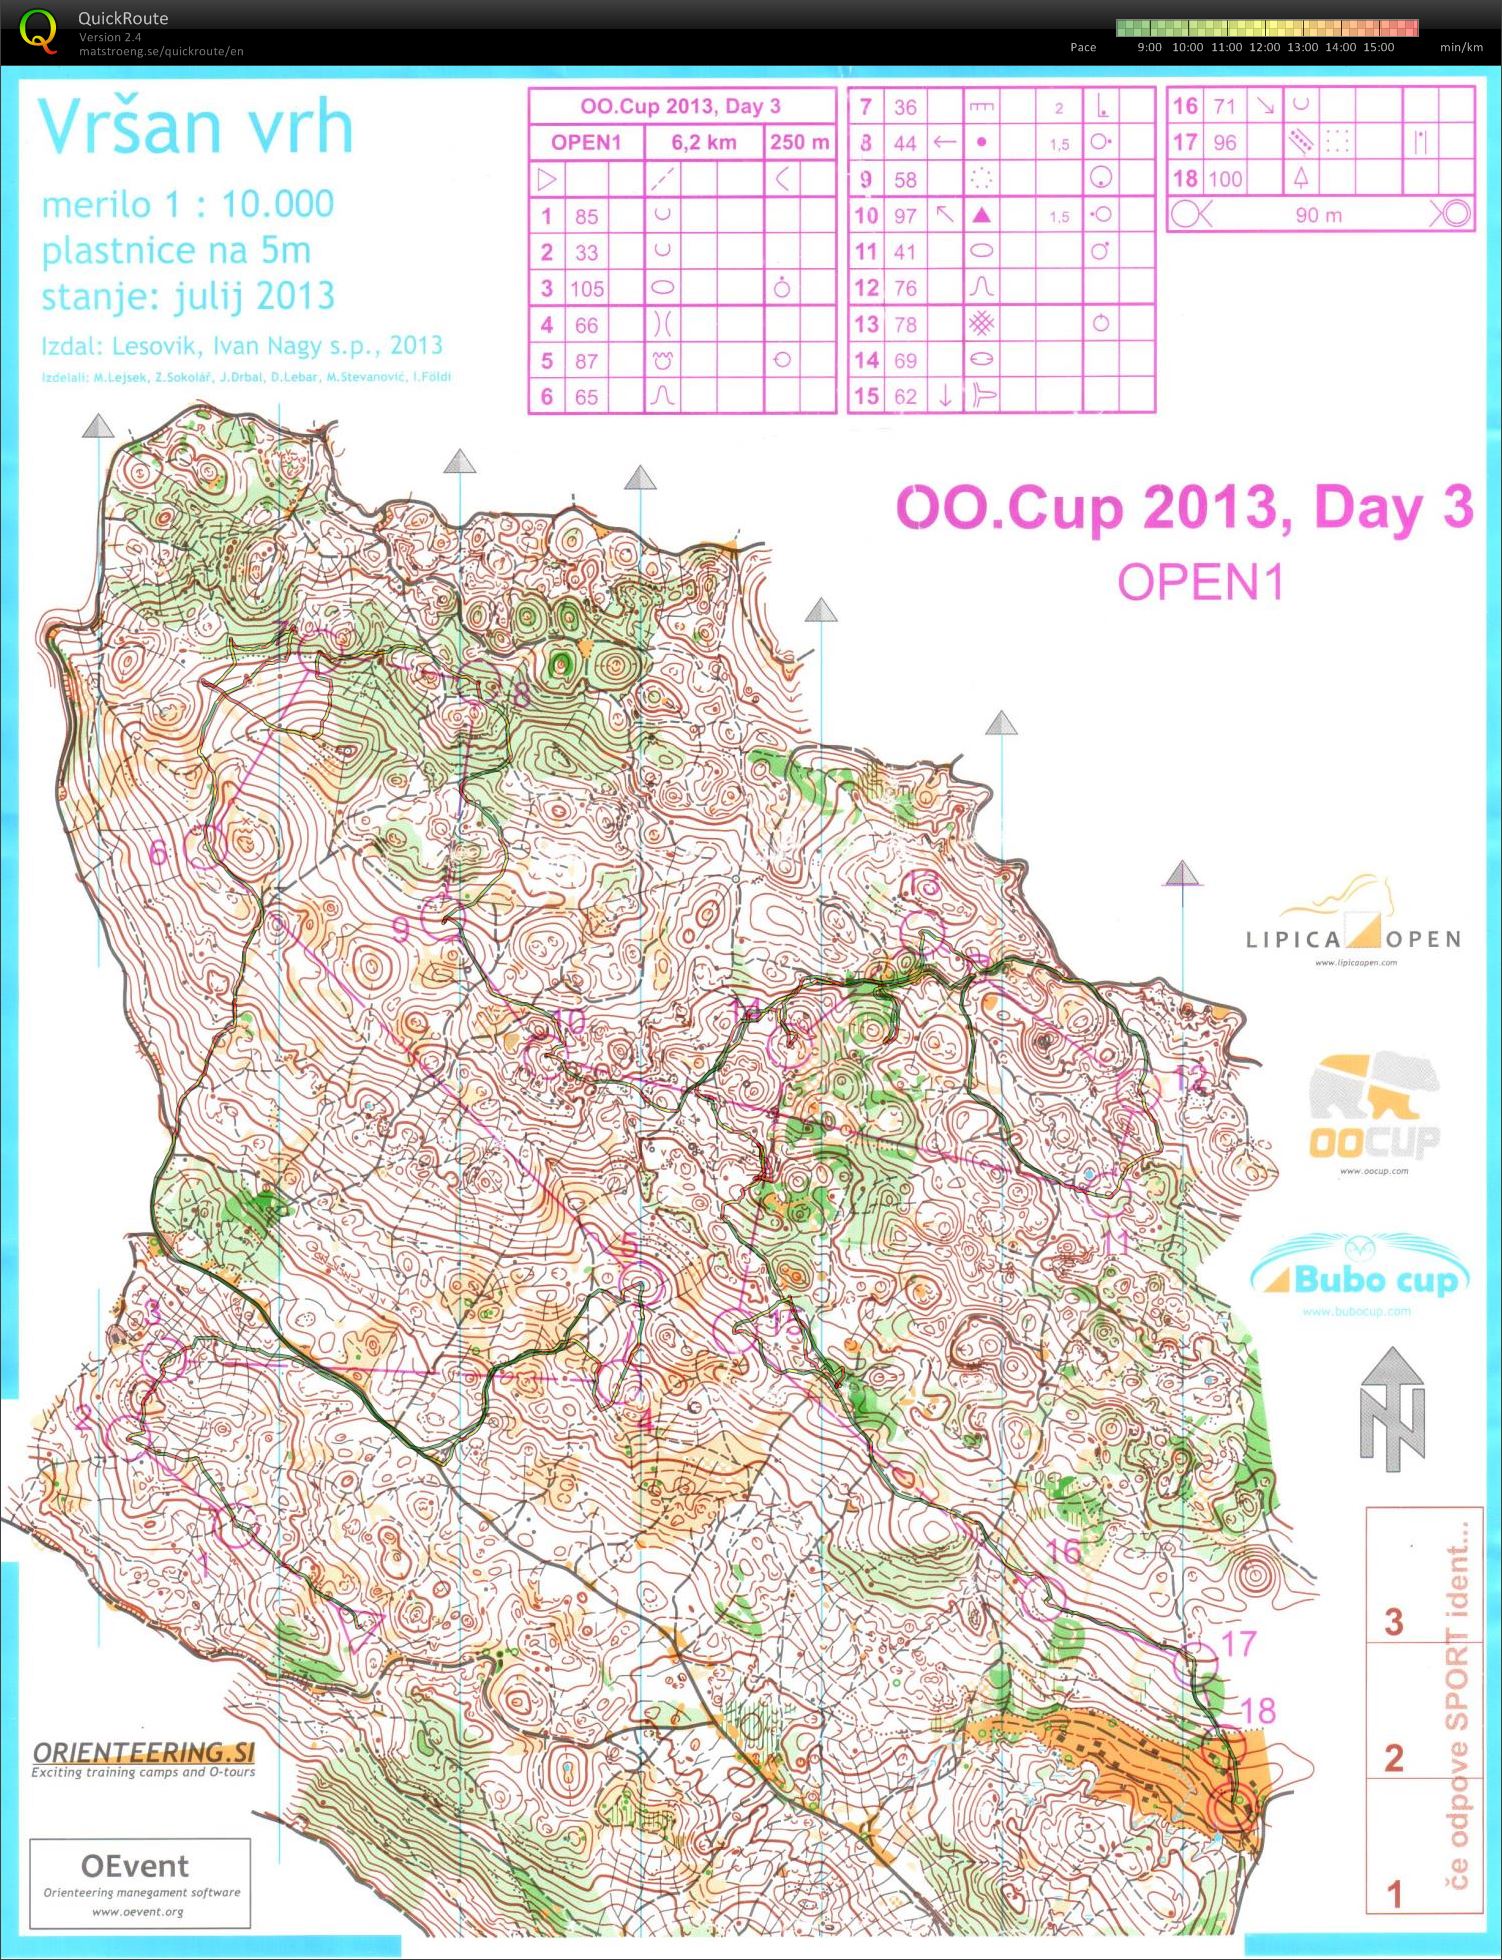 OOCup stage 3. (28/07/2013)